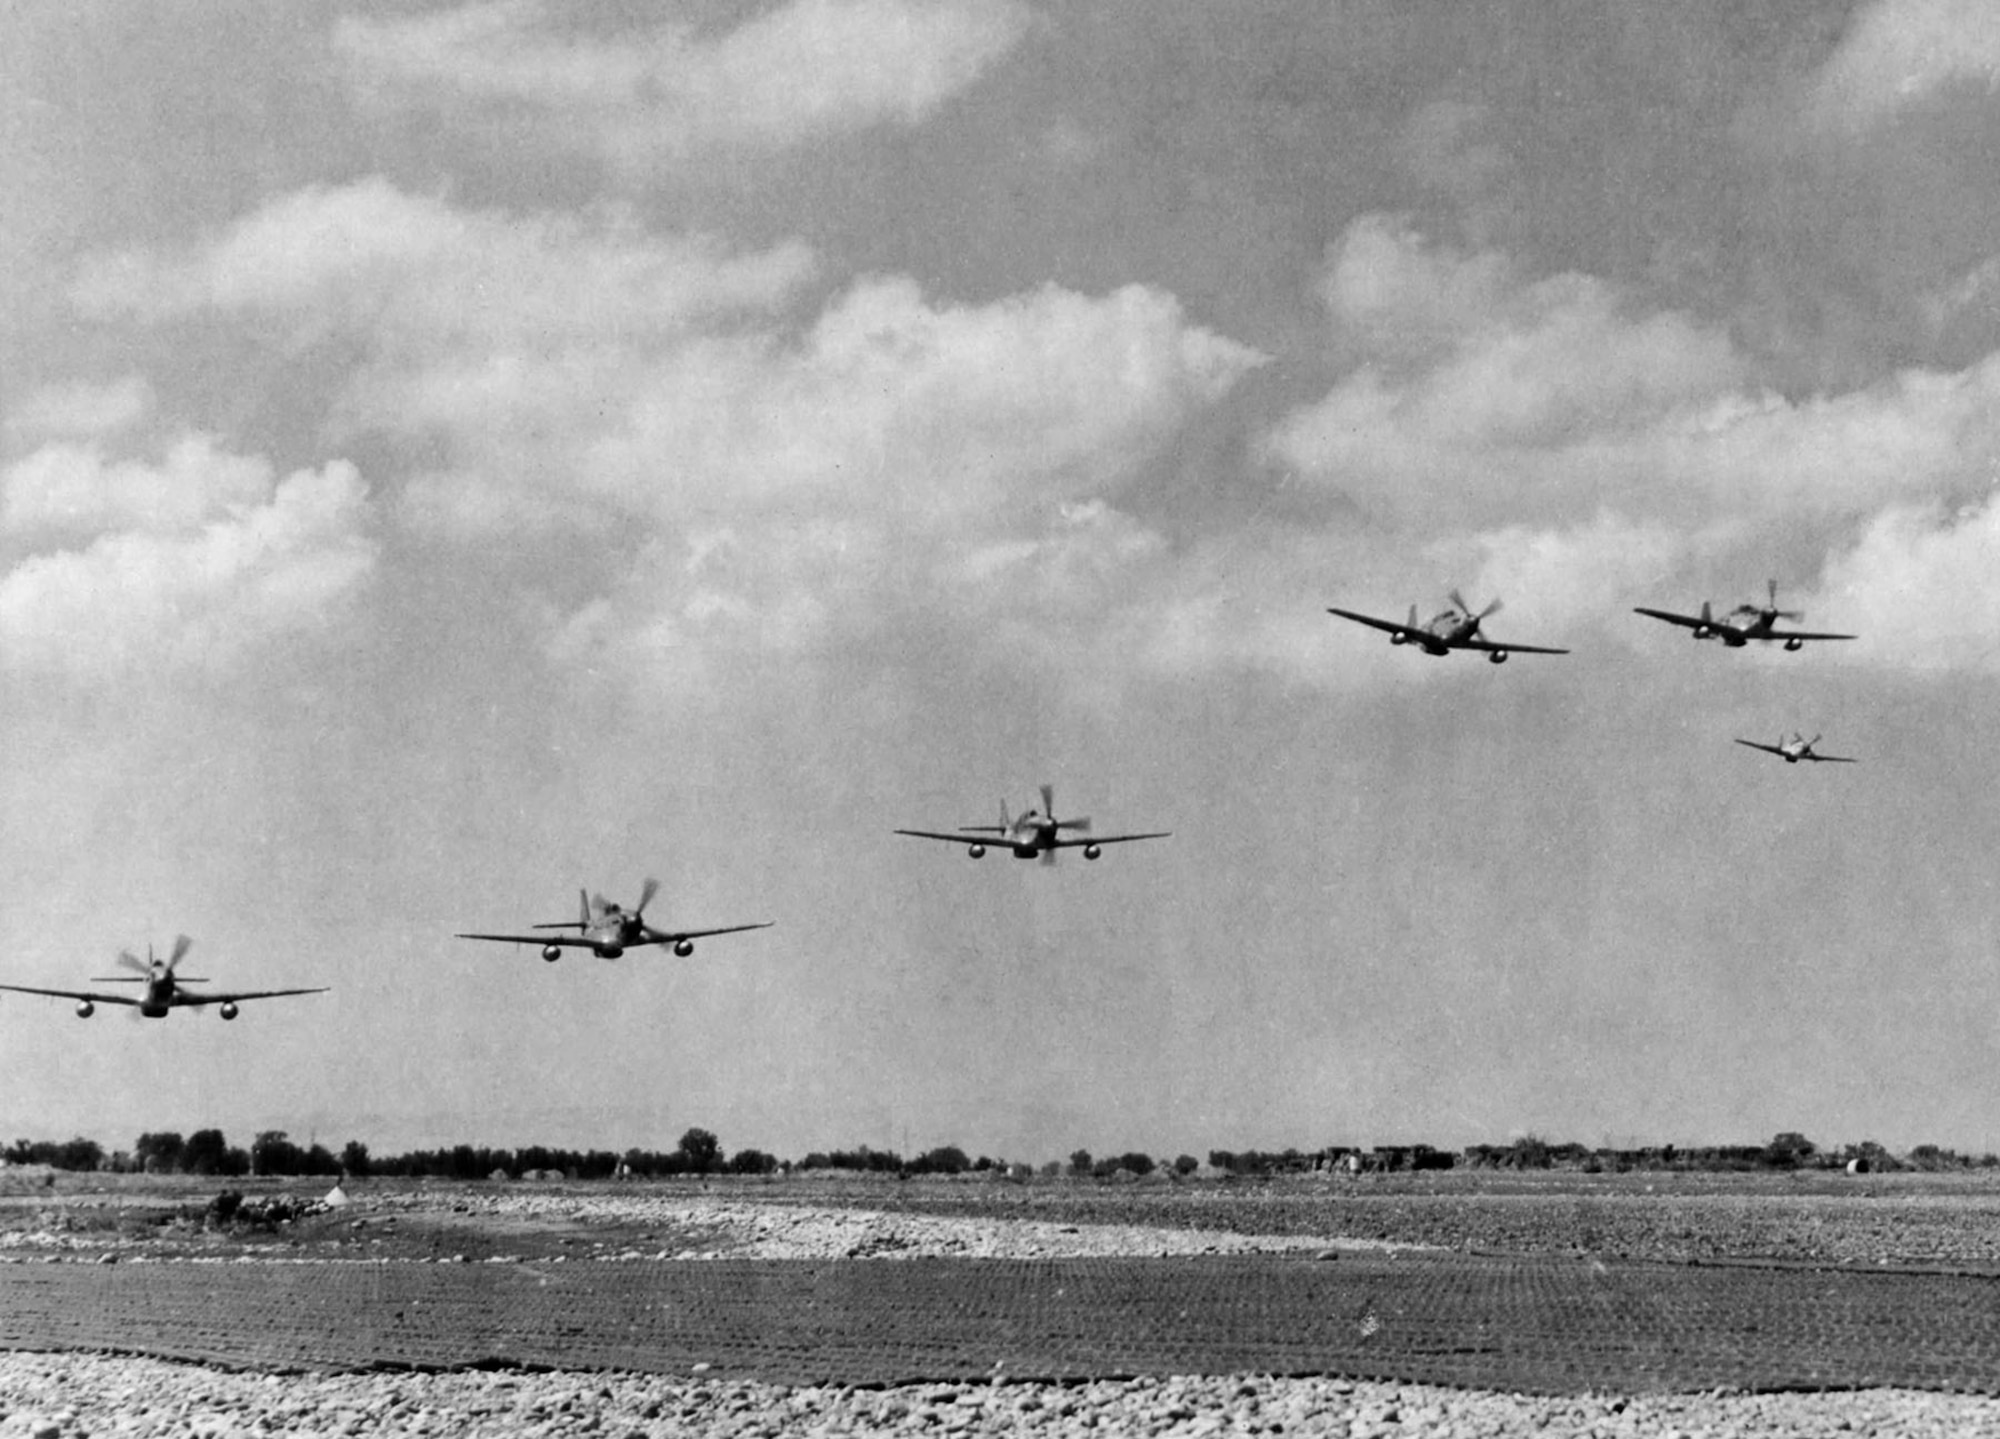 Red Tails of the 332nd Fighter Group take off to escort heavy bombers sent to bomb enemy oil fields at Blechhammer, Germany, on Aug. 7, 1944. Note the P-51s have wing tanks for the extra fuel needed for such long missions. (U.S. Air Force photo)